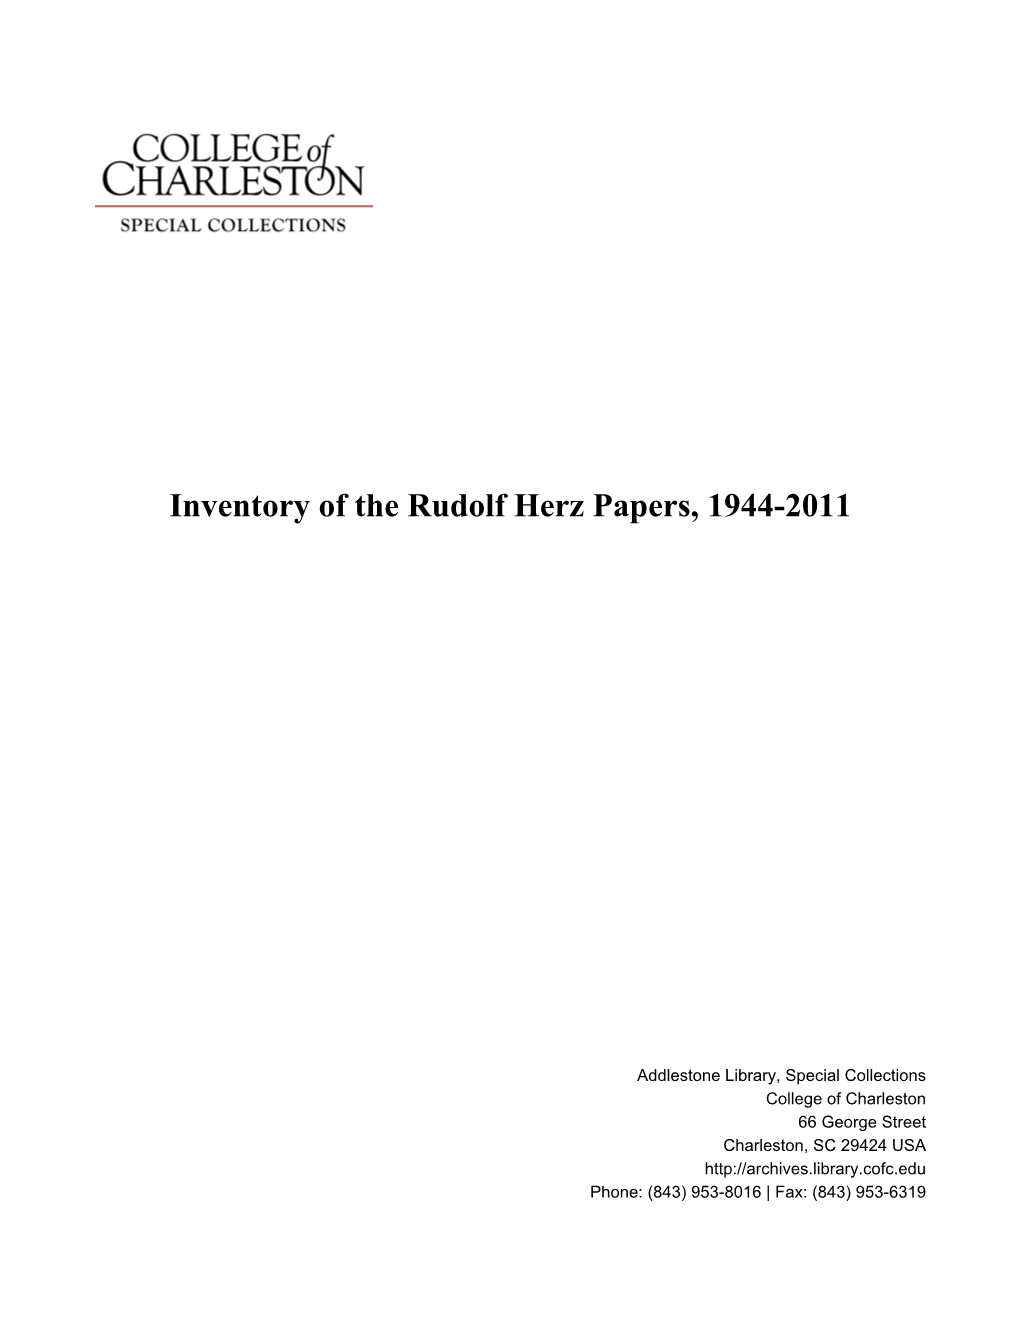 Inventory of the Rudolf Herz Papers, 1944-2011